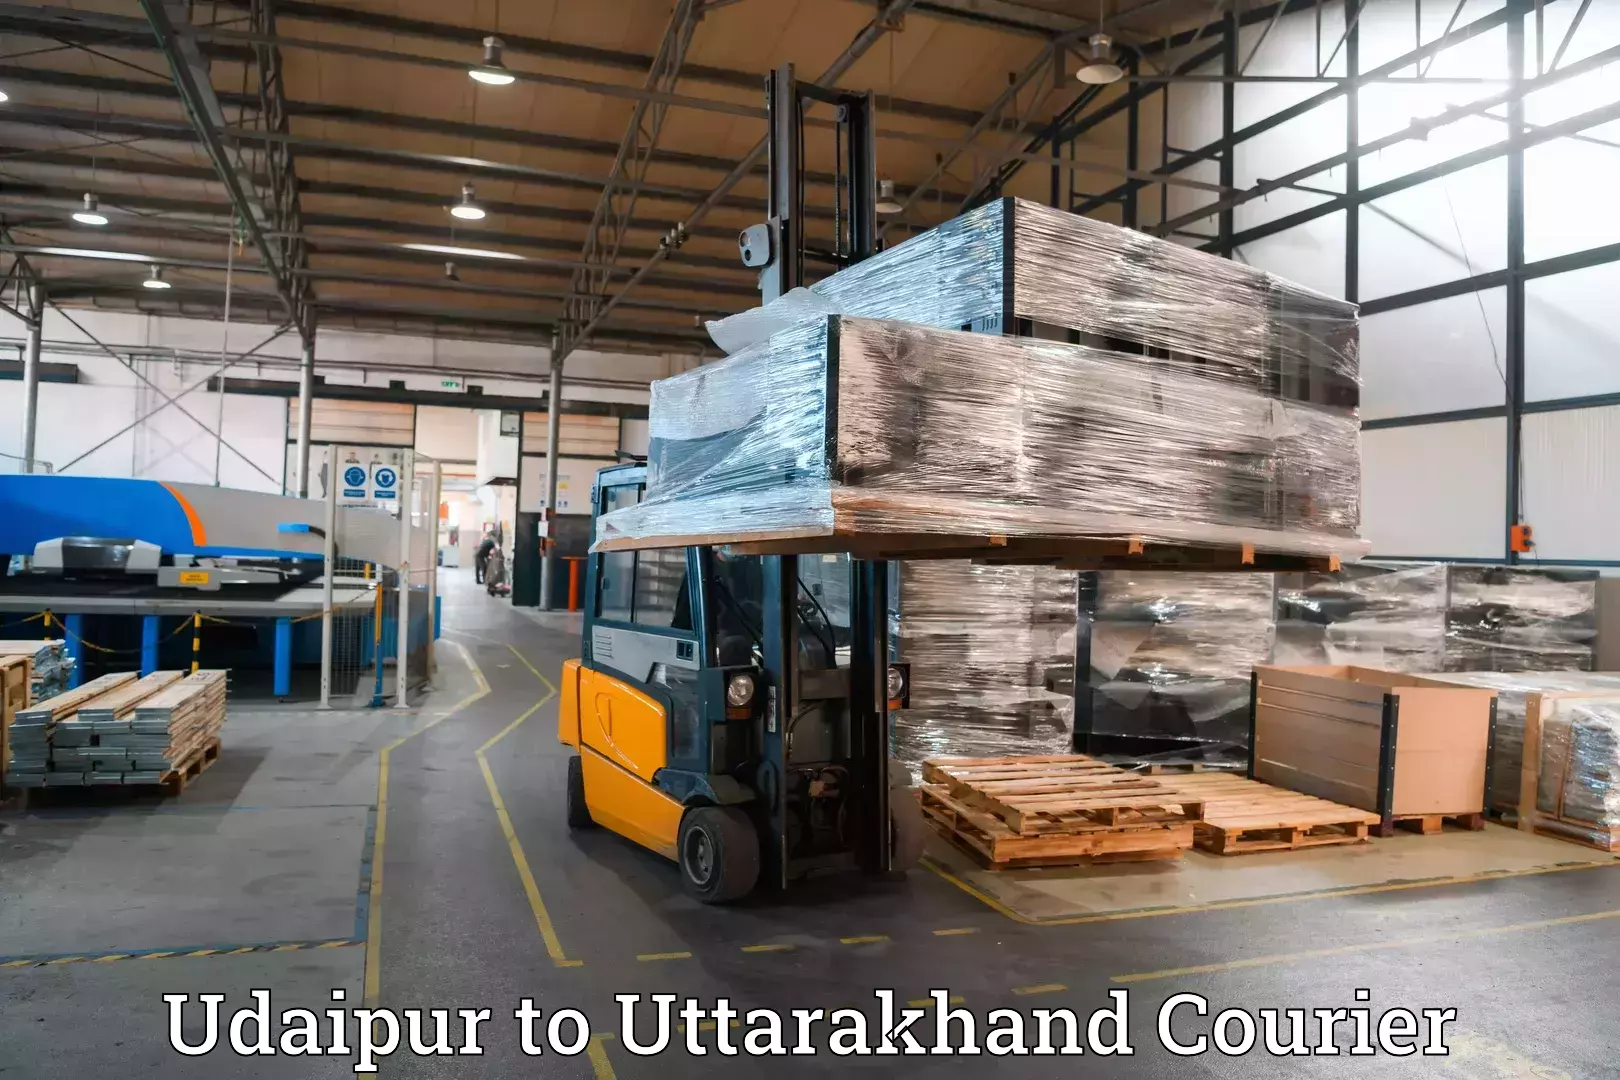 Baggage transport cost in Udaipur to Uttarakhand